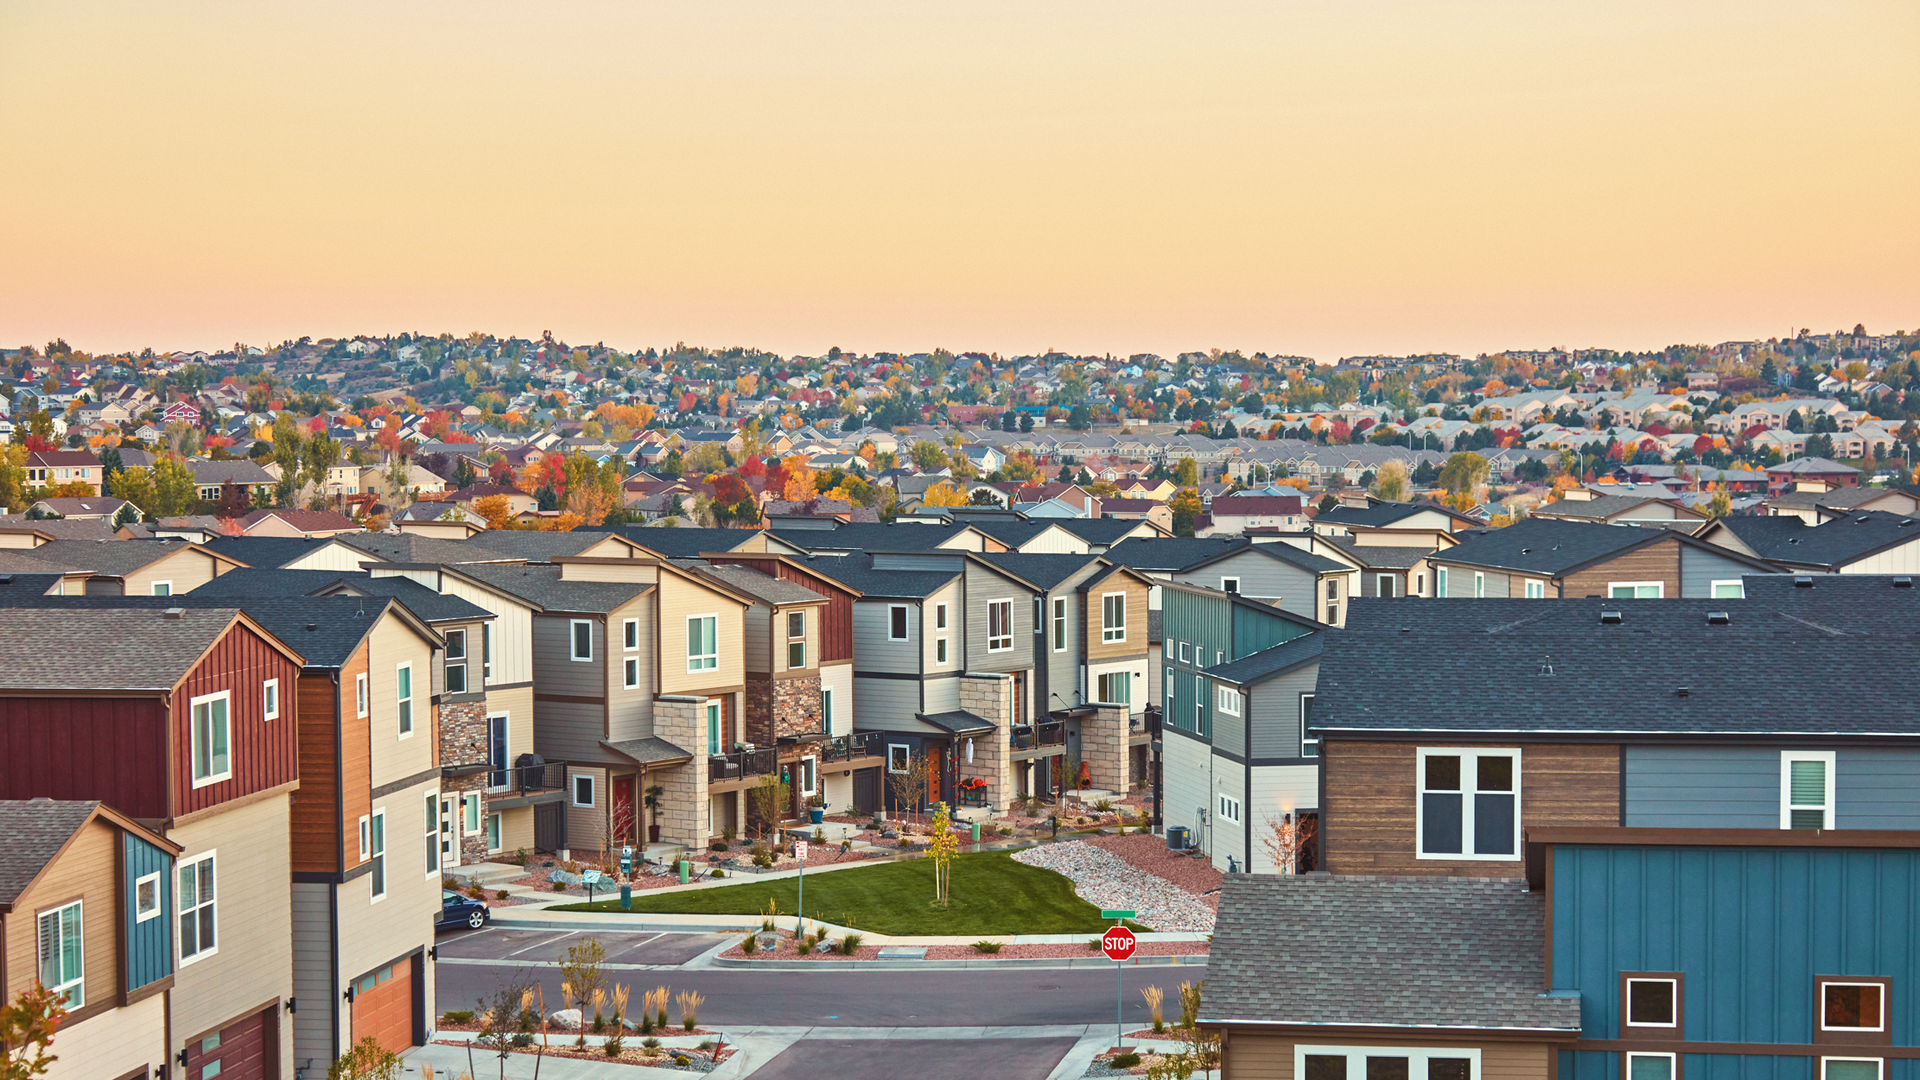 A suburb with rows of colorful houses stretching into the distance during twilight.